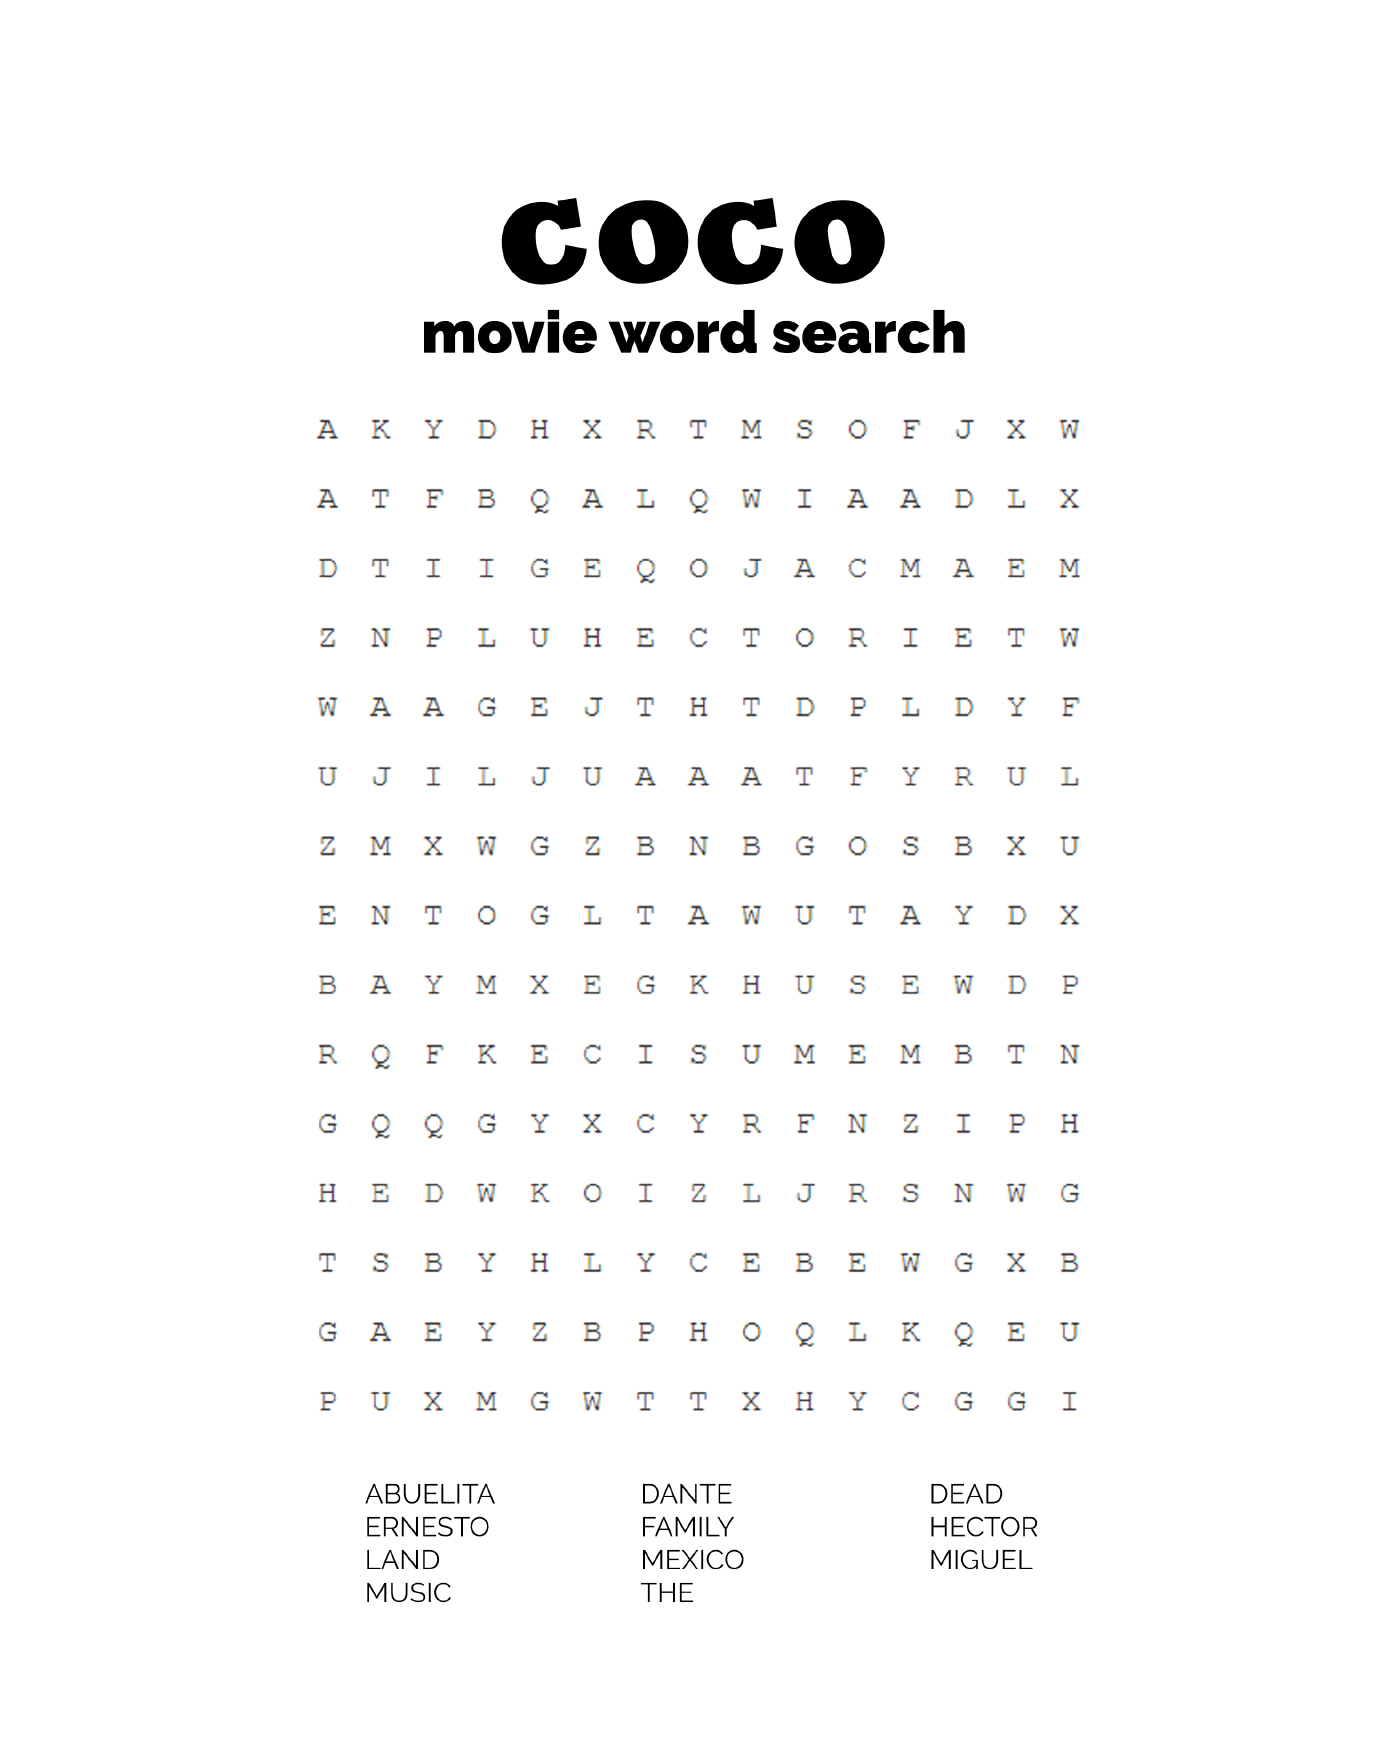  Search for words based on the movie Coco 